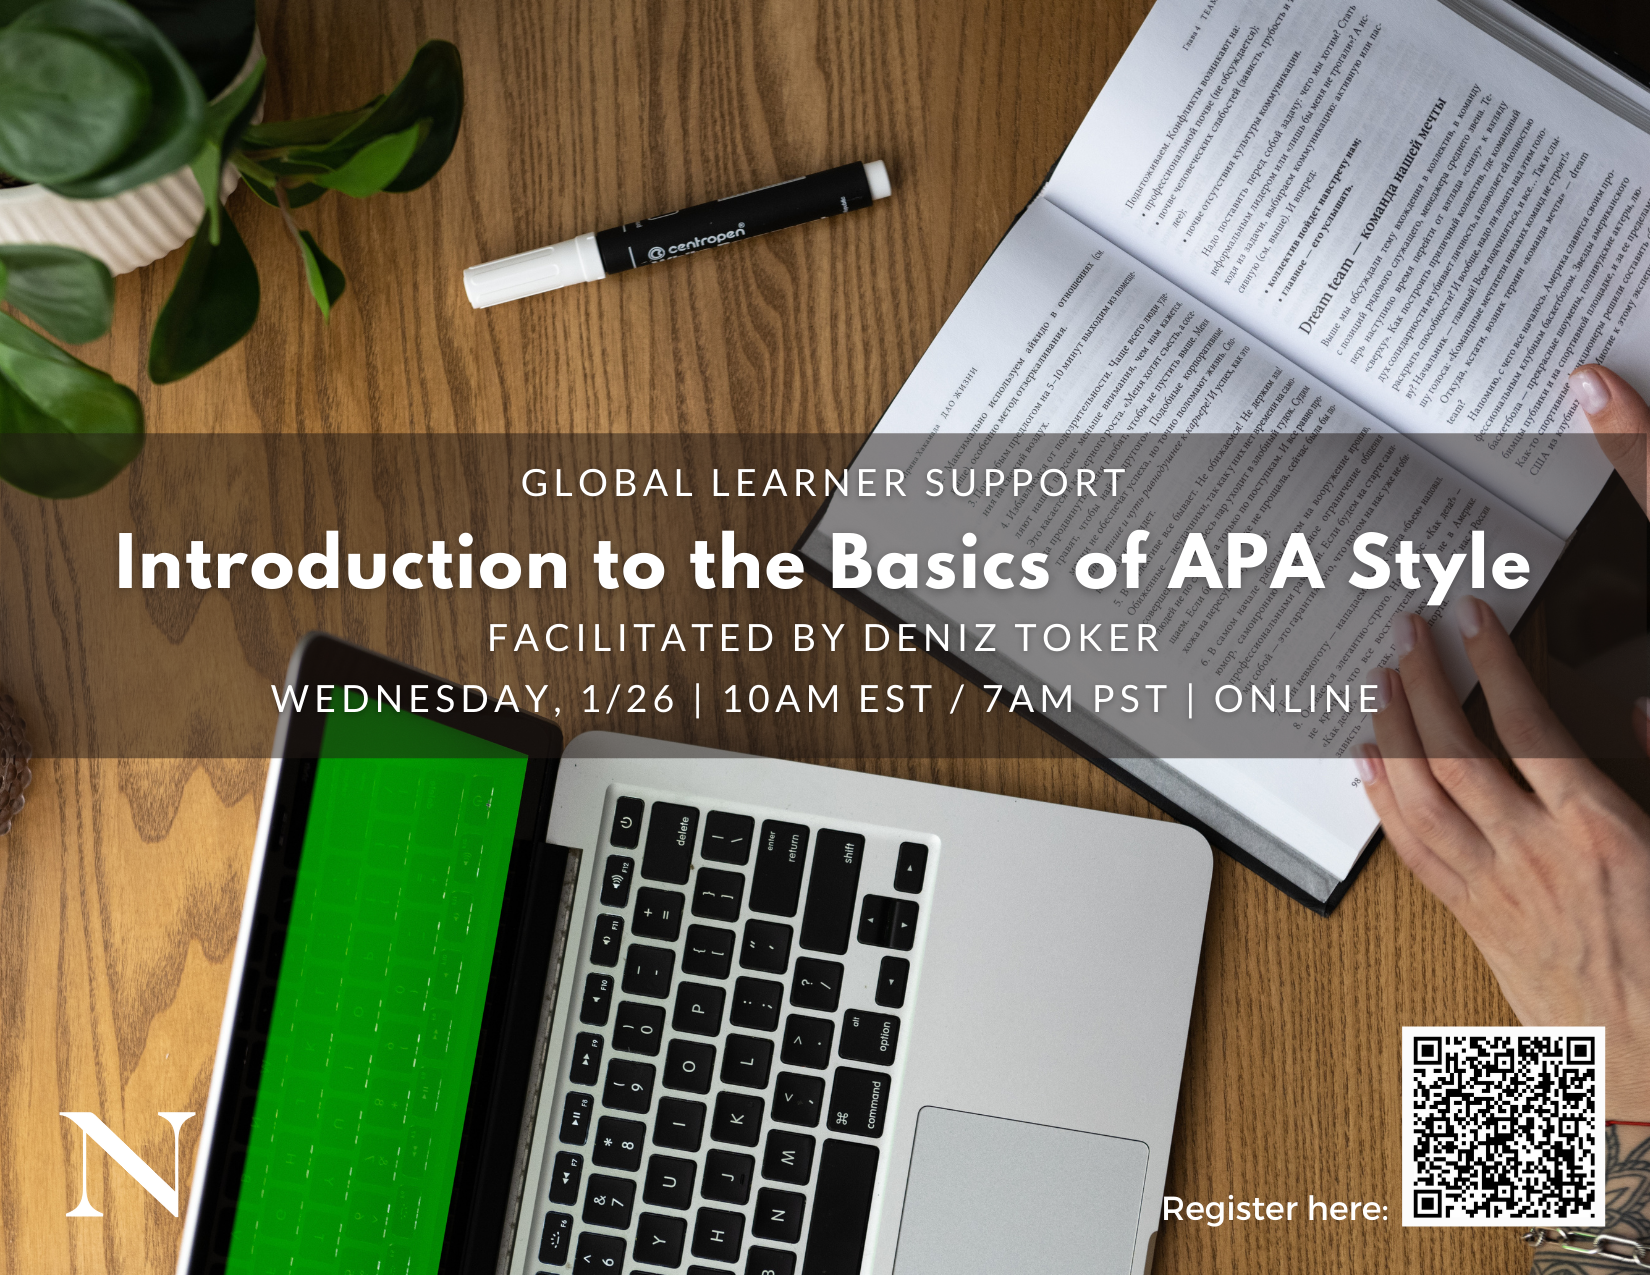 Introduction to the Basics of APA Style